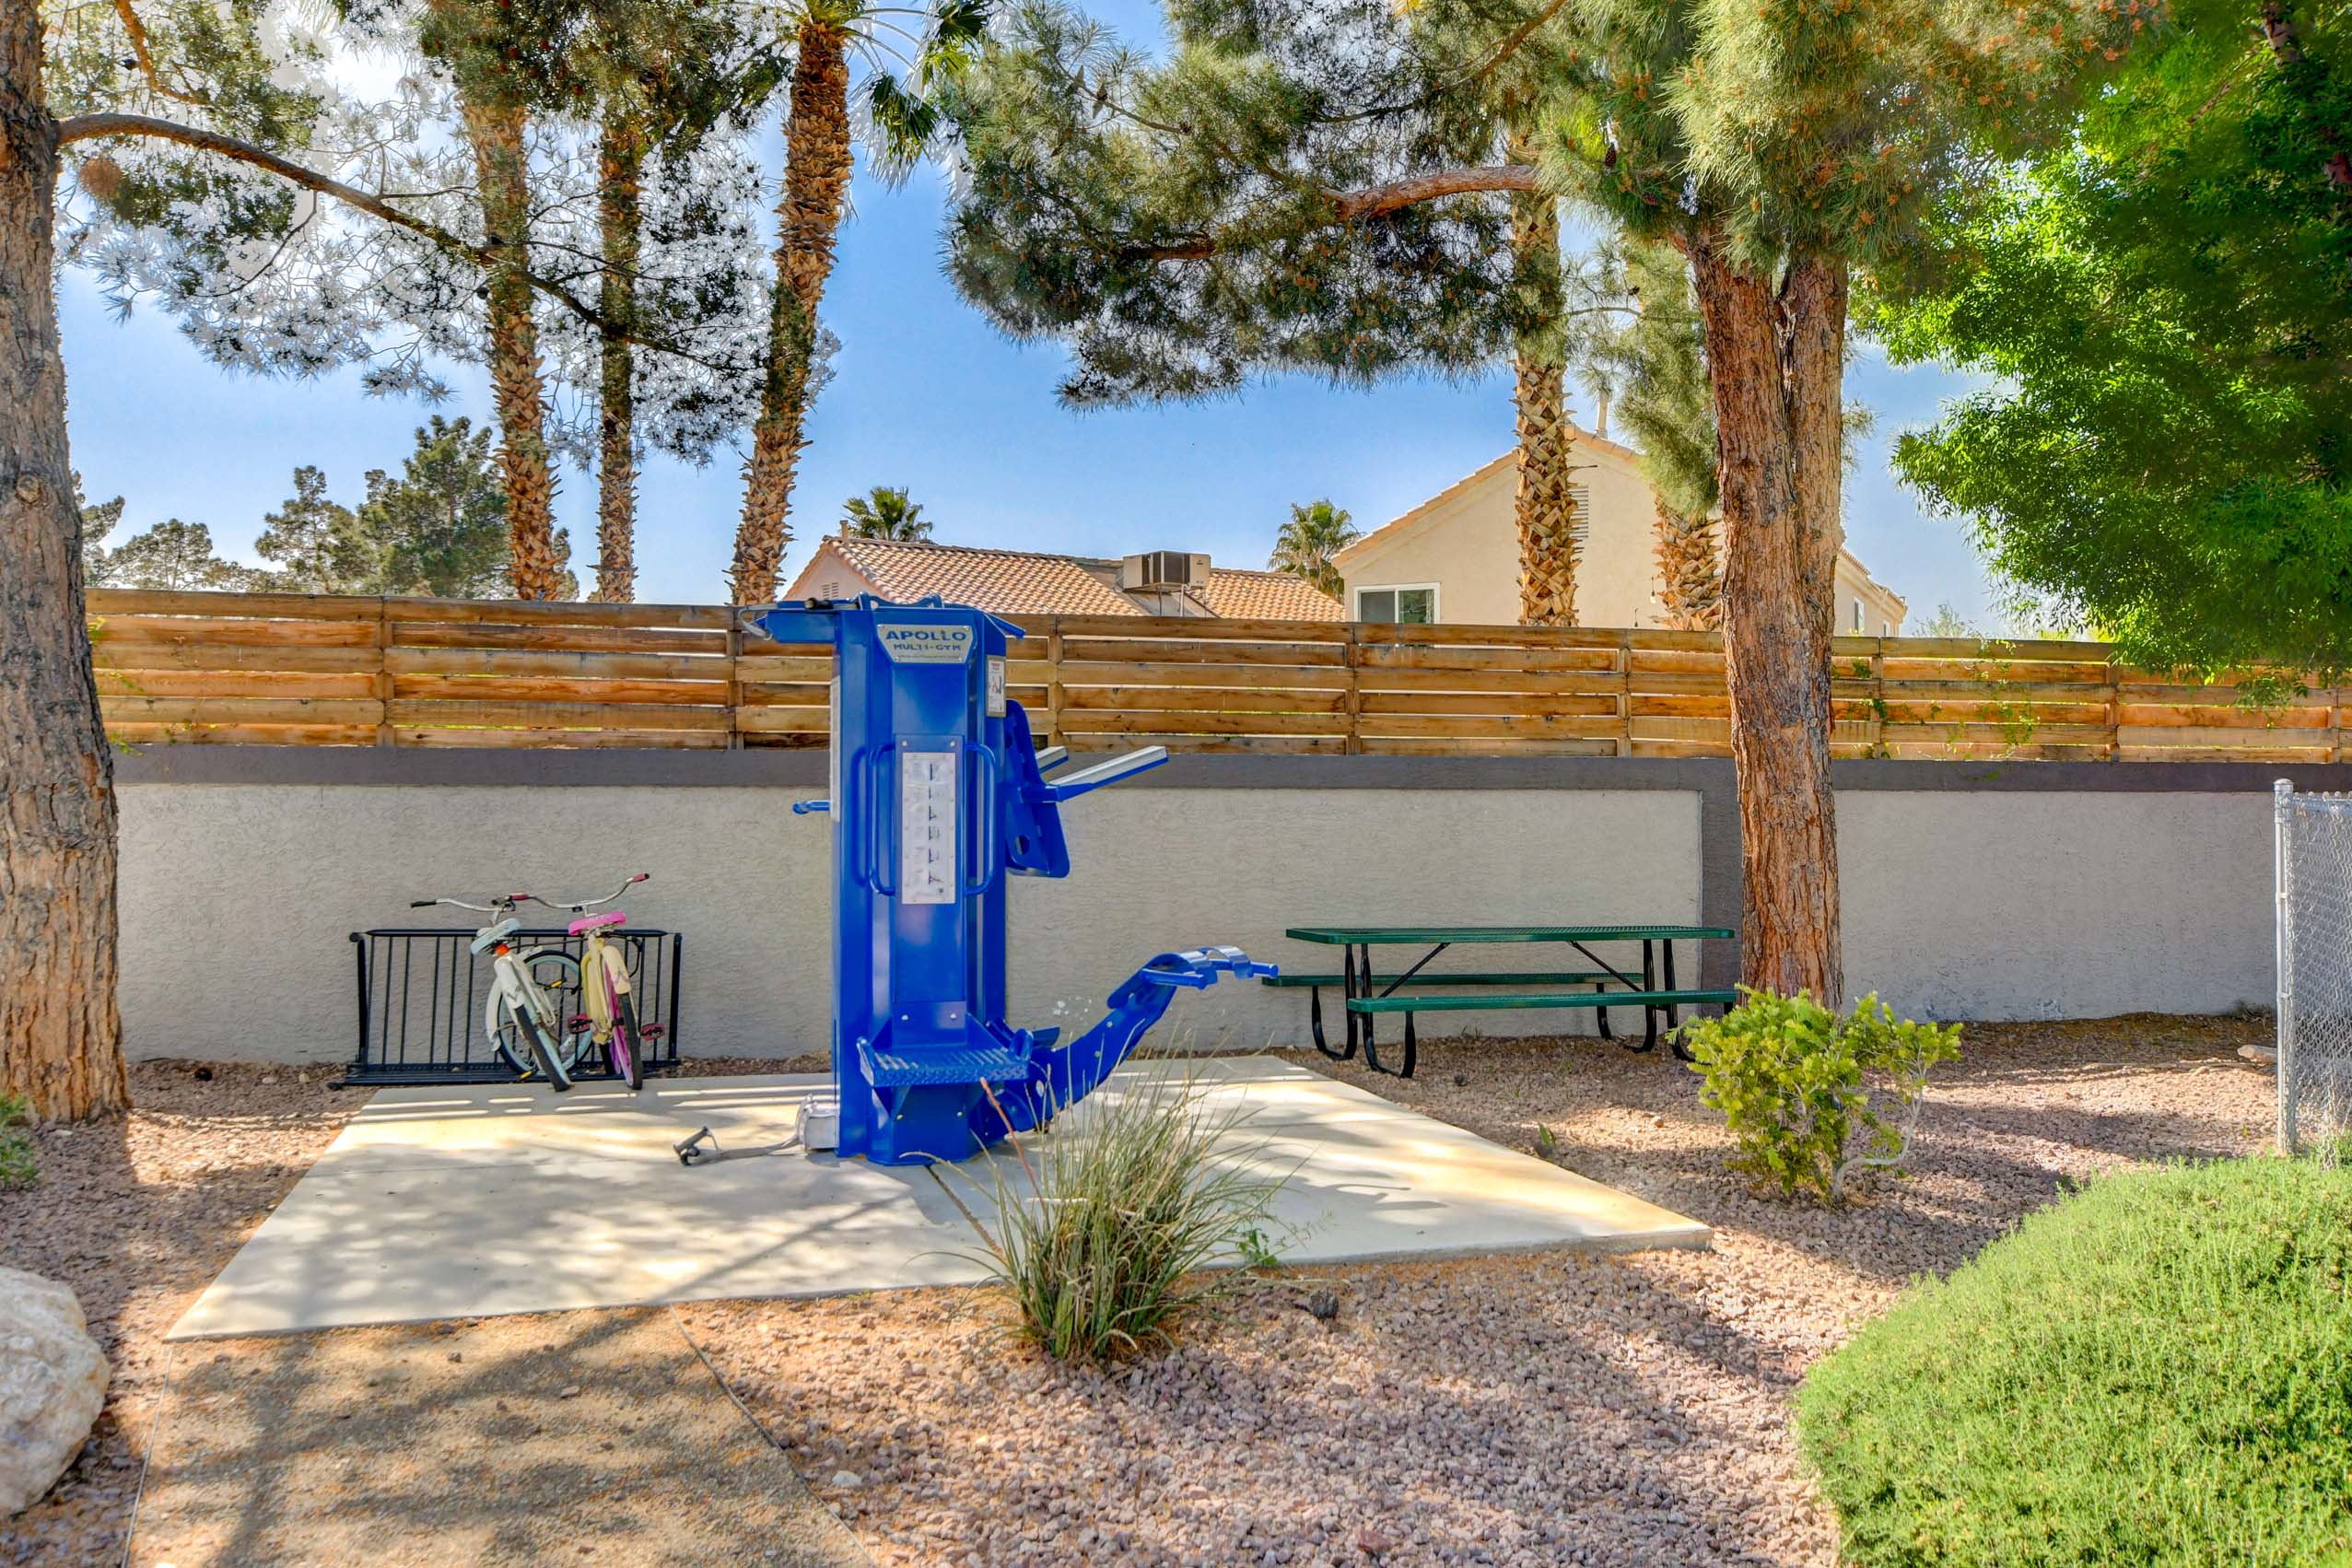 The 95 Apartments outdoor multi-gym equipment